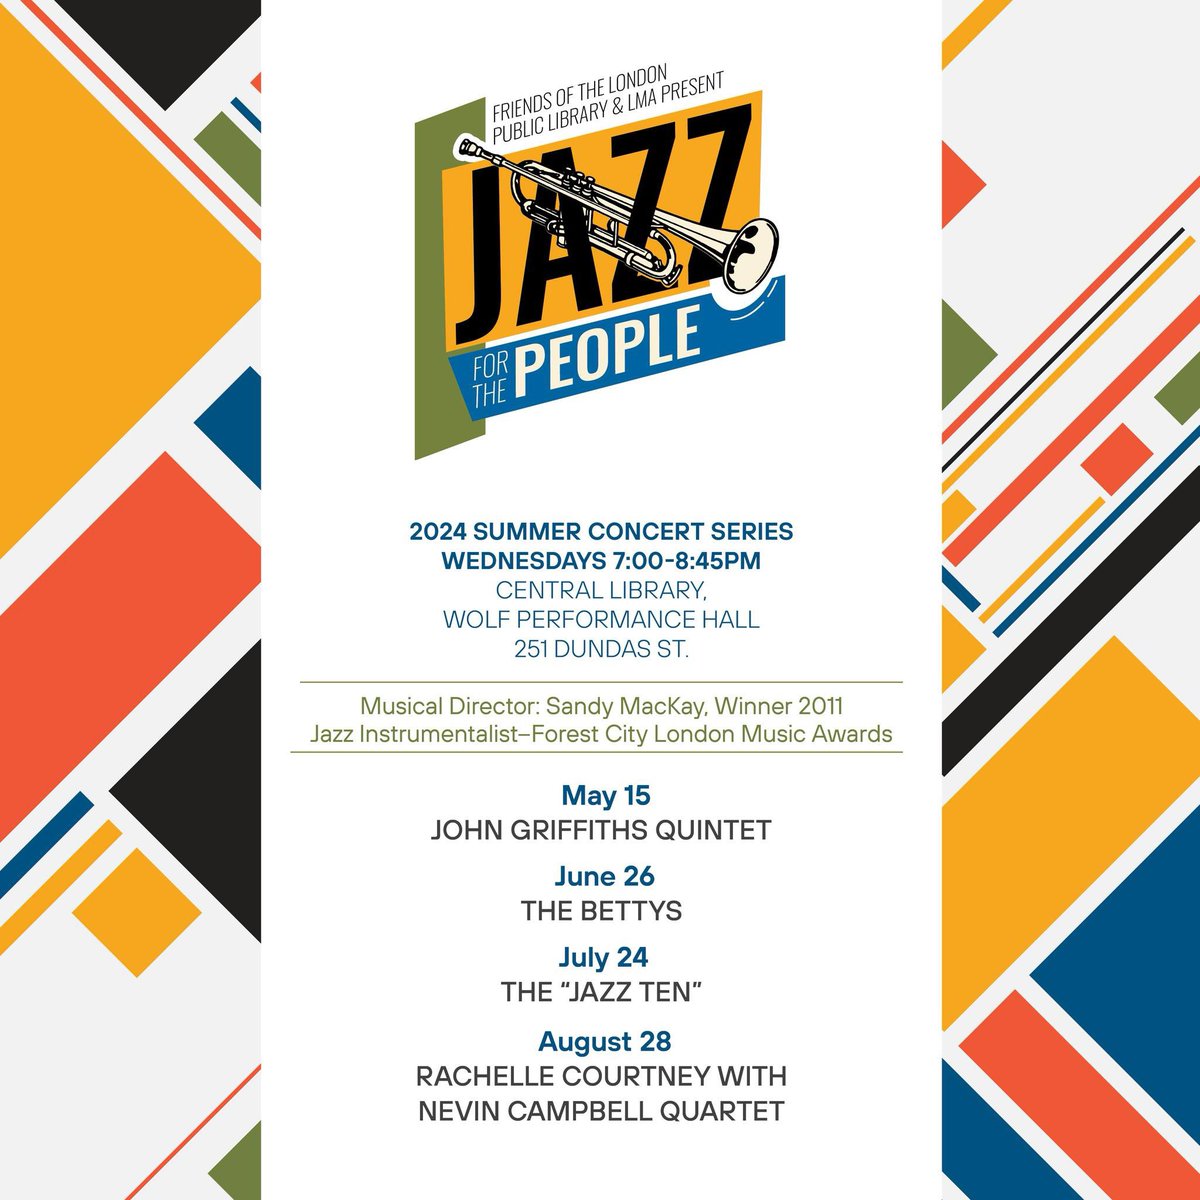 🎶Celebrate with some Jazz🎷with the John Griffiths Quintet🎺at The Wolf Hall next to the central library THIS EVENING! of 16th May @ 700pm🎹🎶 For more Jazz events see friendslondonlibrary.ca/jazz-for-the-p…